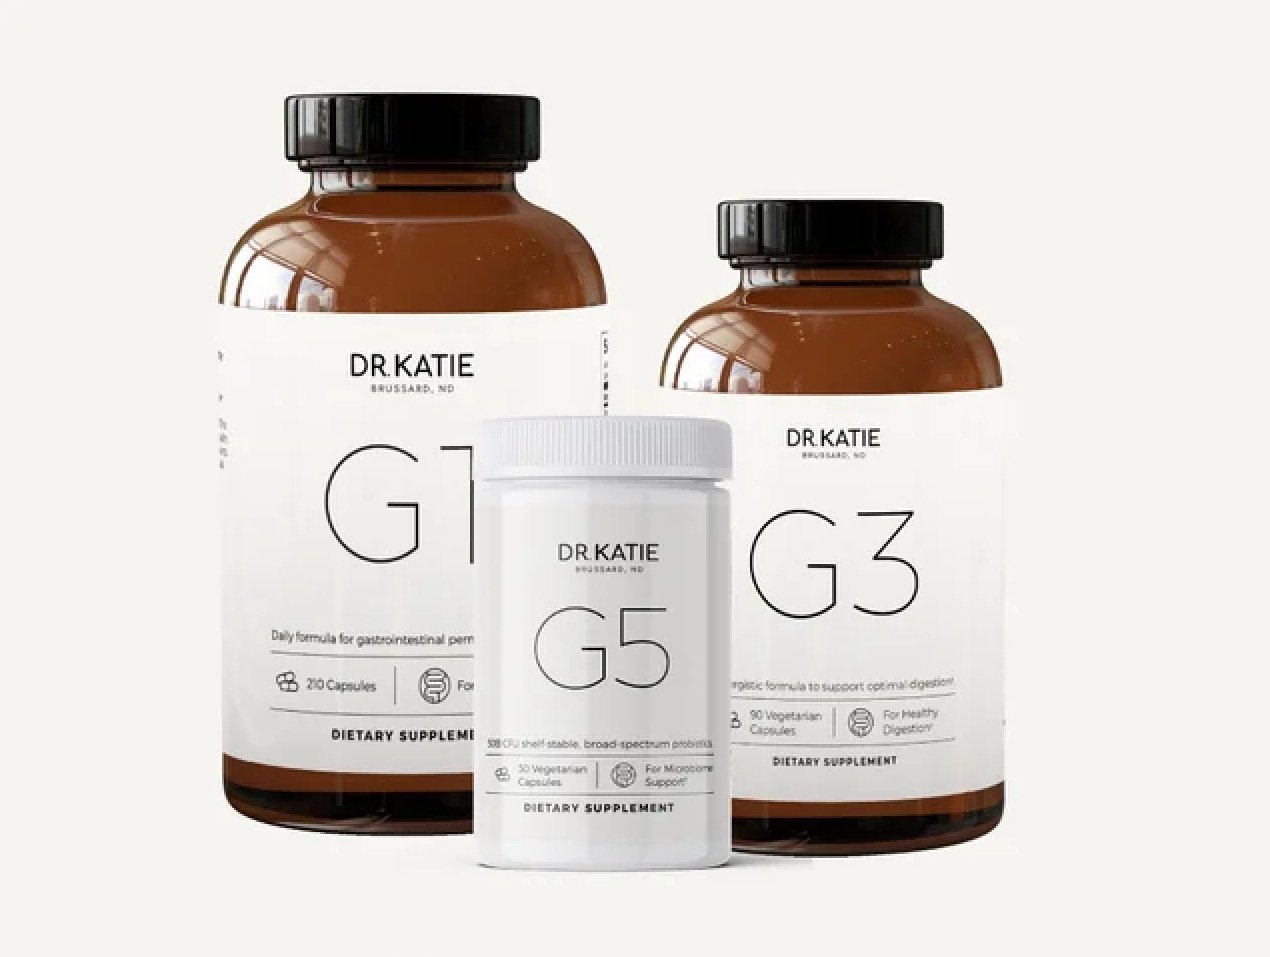 Dr. Katie Brussard | Signature Supplements created by a physician to support gut health and adrenal health | Quality prenatal and postnatal vitamins